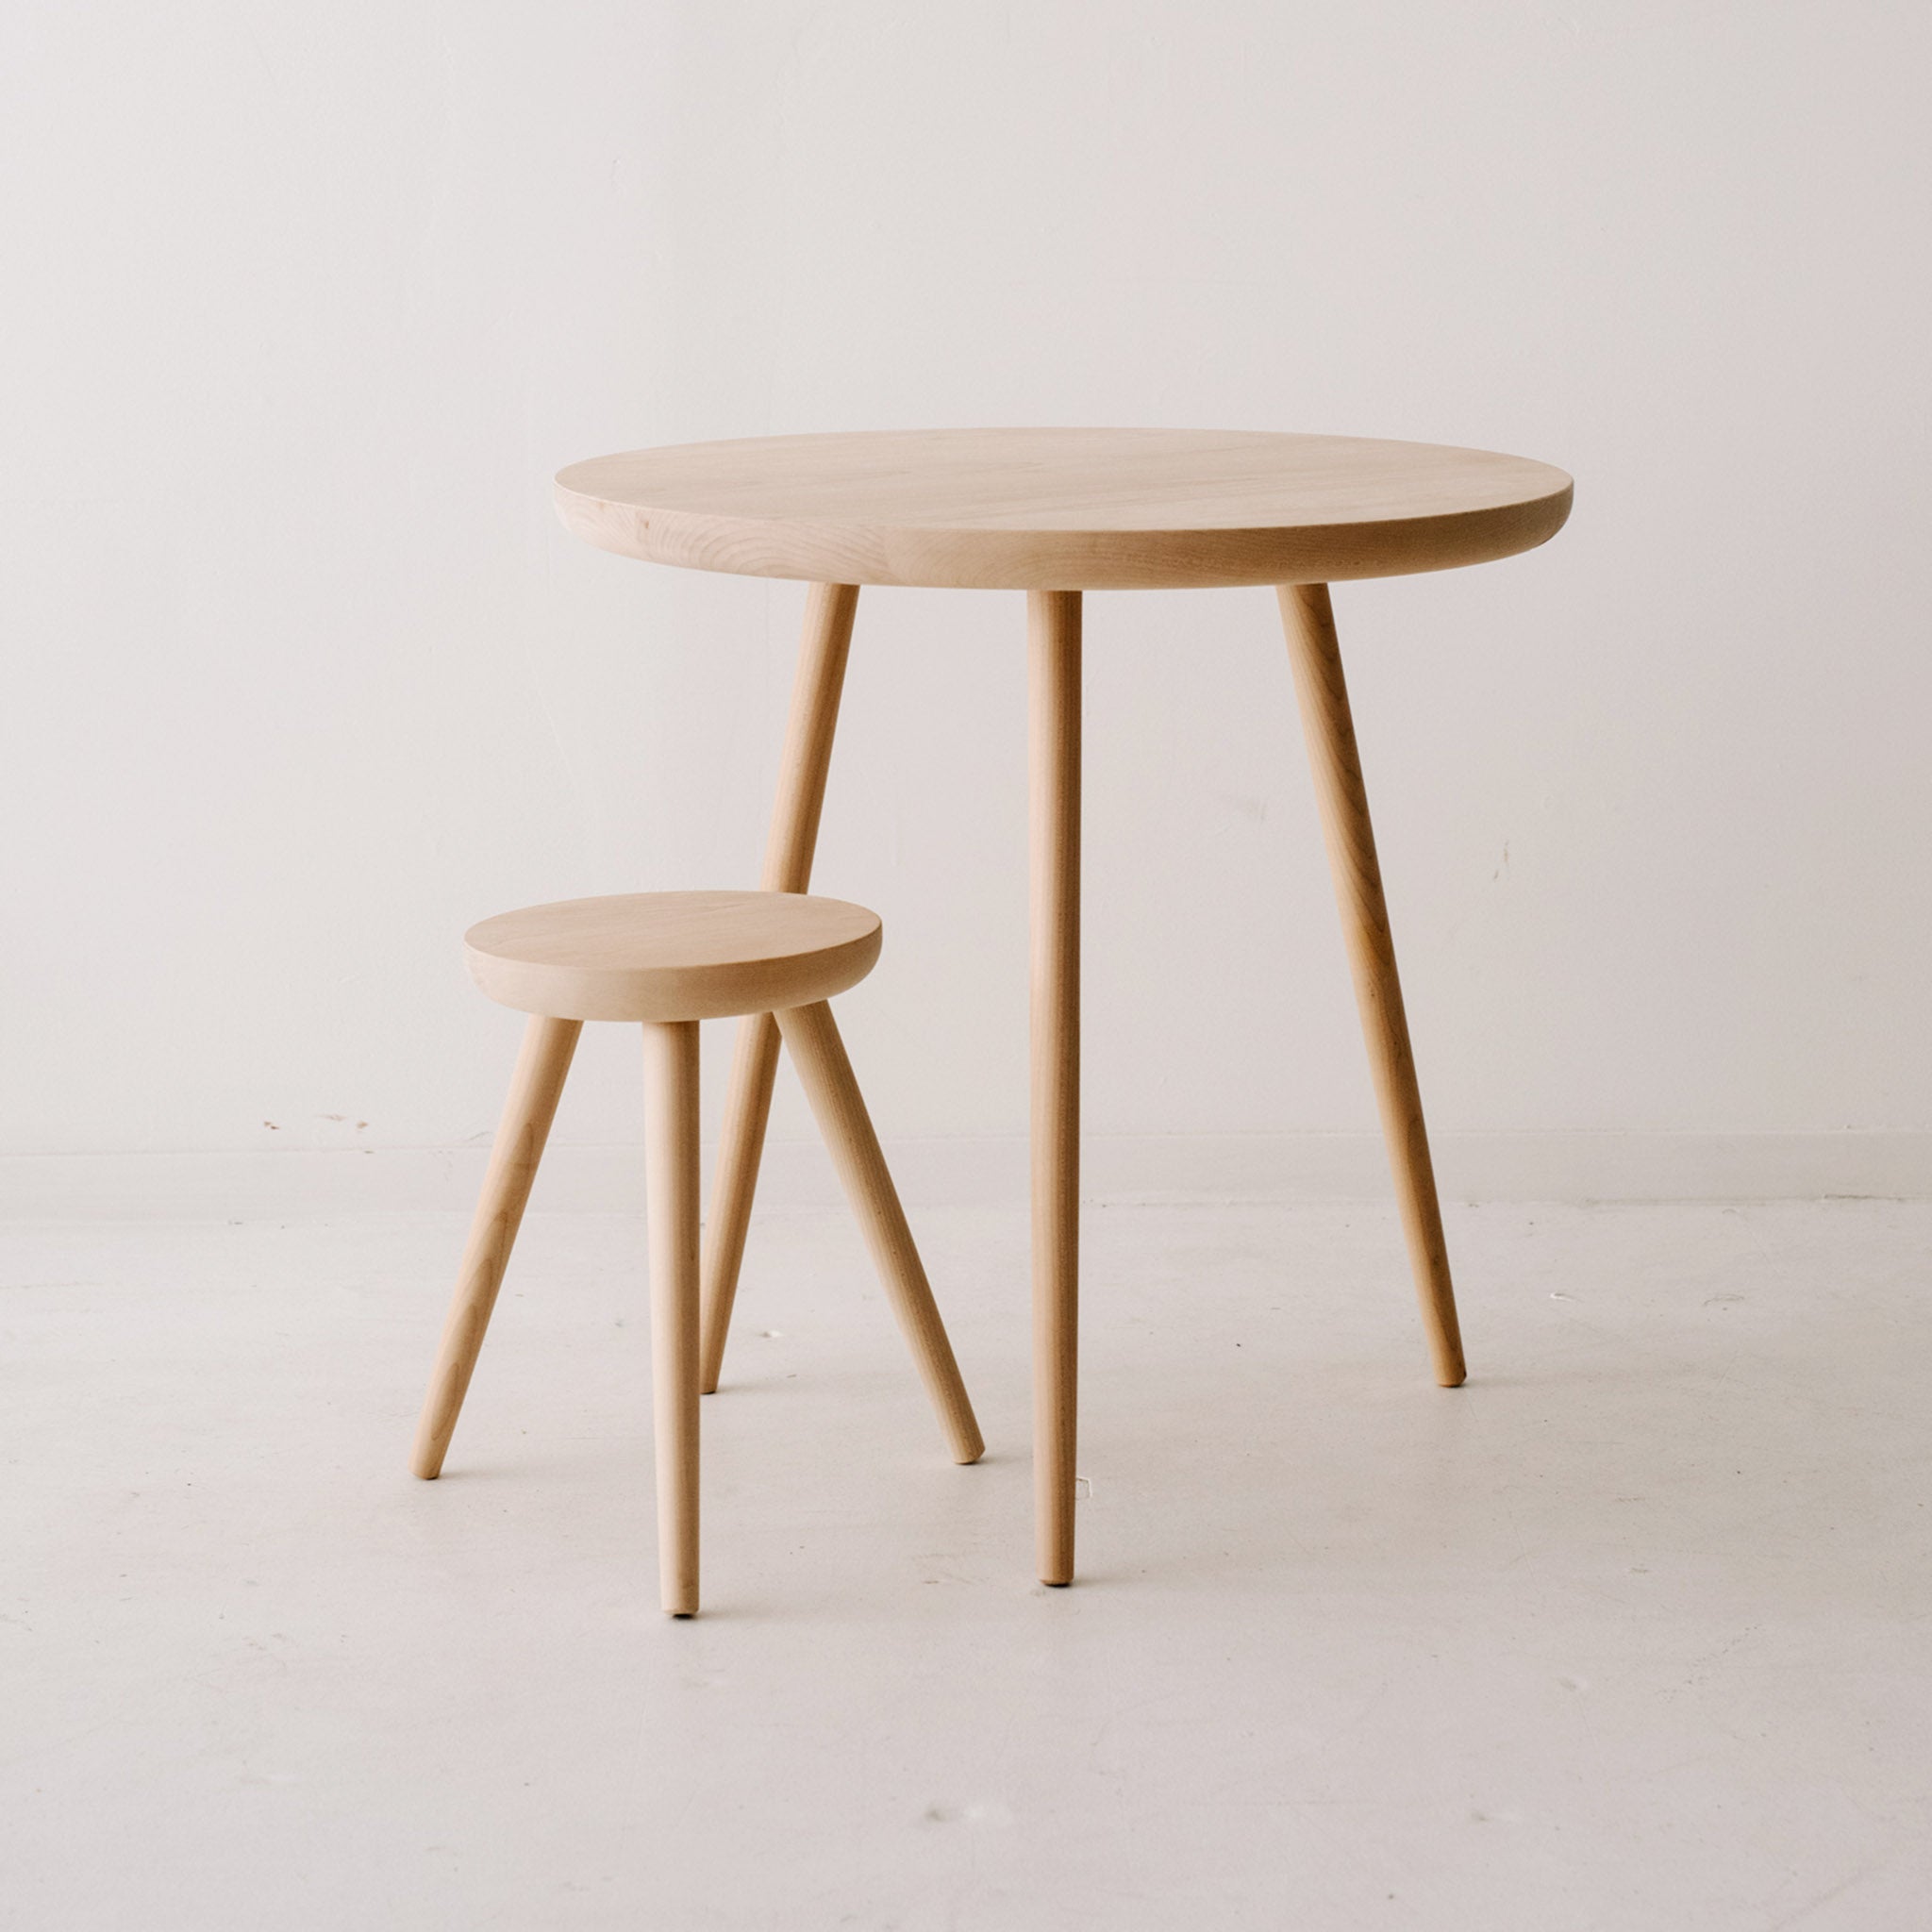 Connect Stool